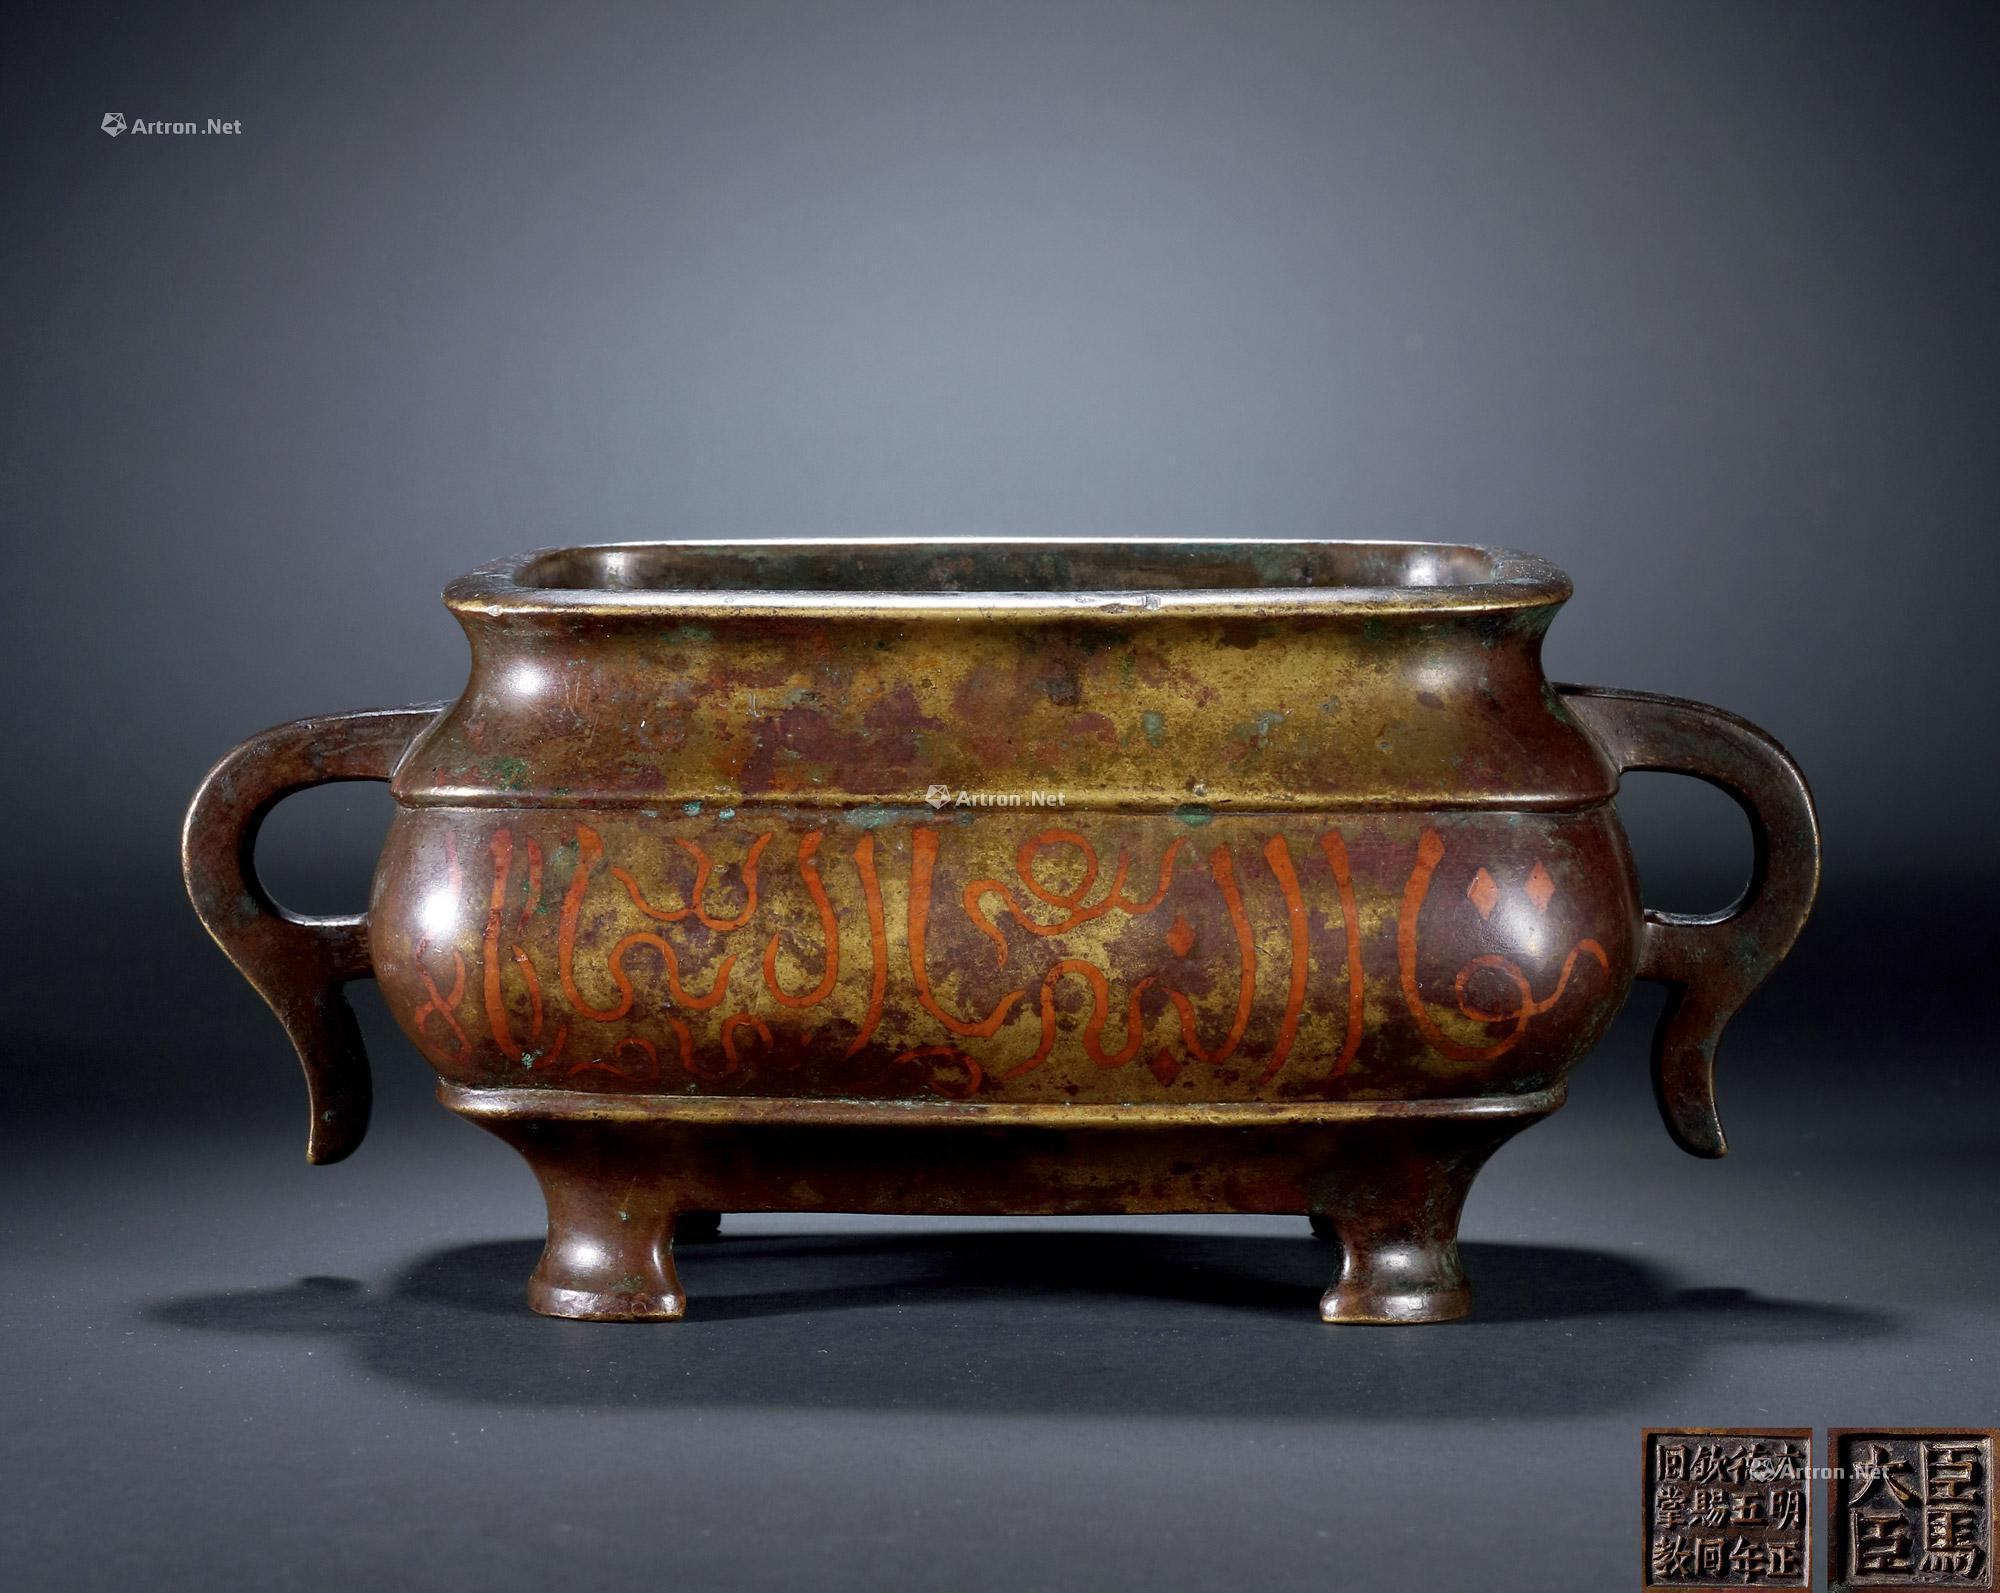 A YELLOW COPPER INLAID RED COPPER CENSER， GRANTED BY THE EMPEROR TO THE MUSLIM SPIRITUAL HEAD